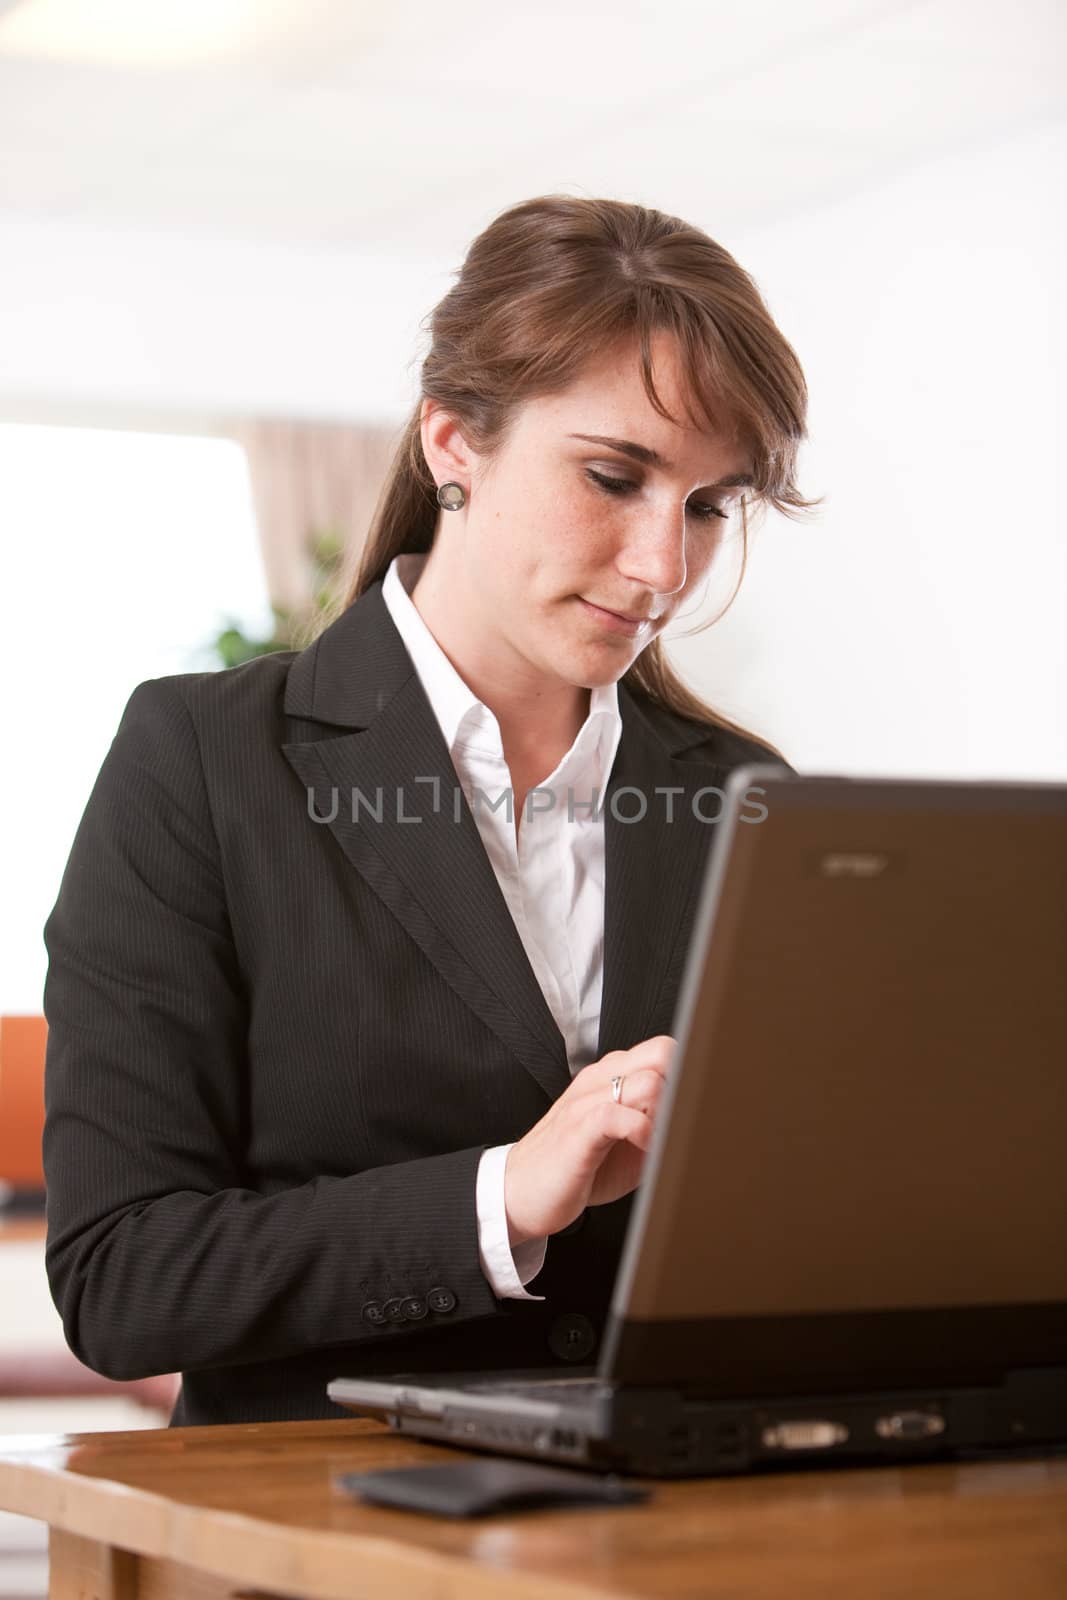 Attractive young woman working behind her laptop